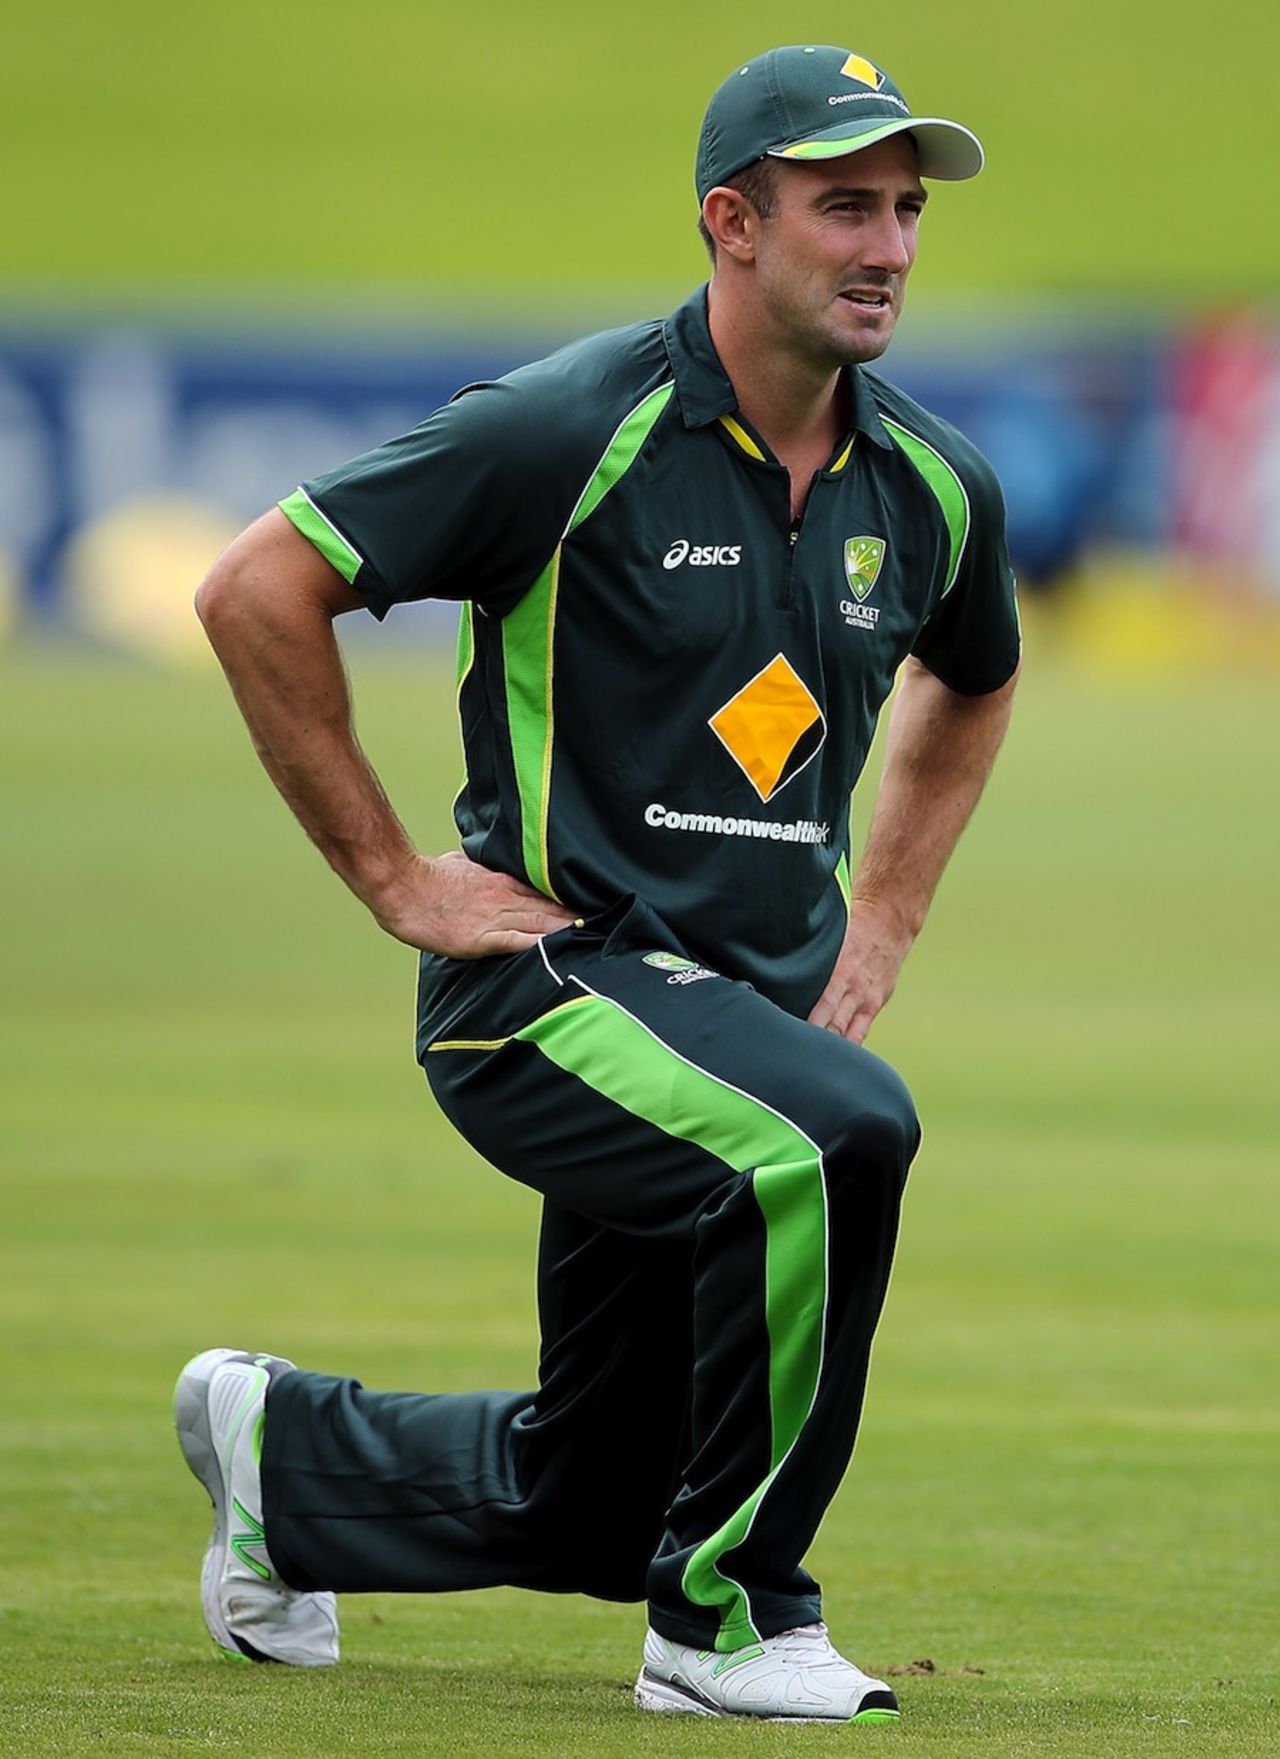 Shaun Marsh stretches during a training session, Centurion, February 10, 2014